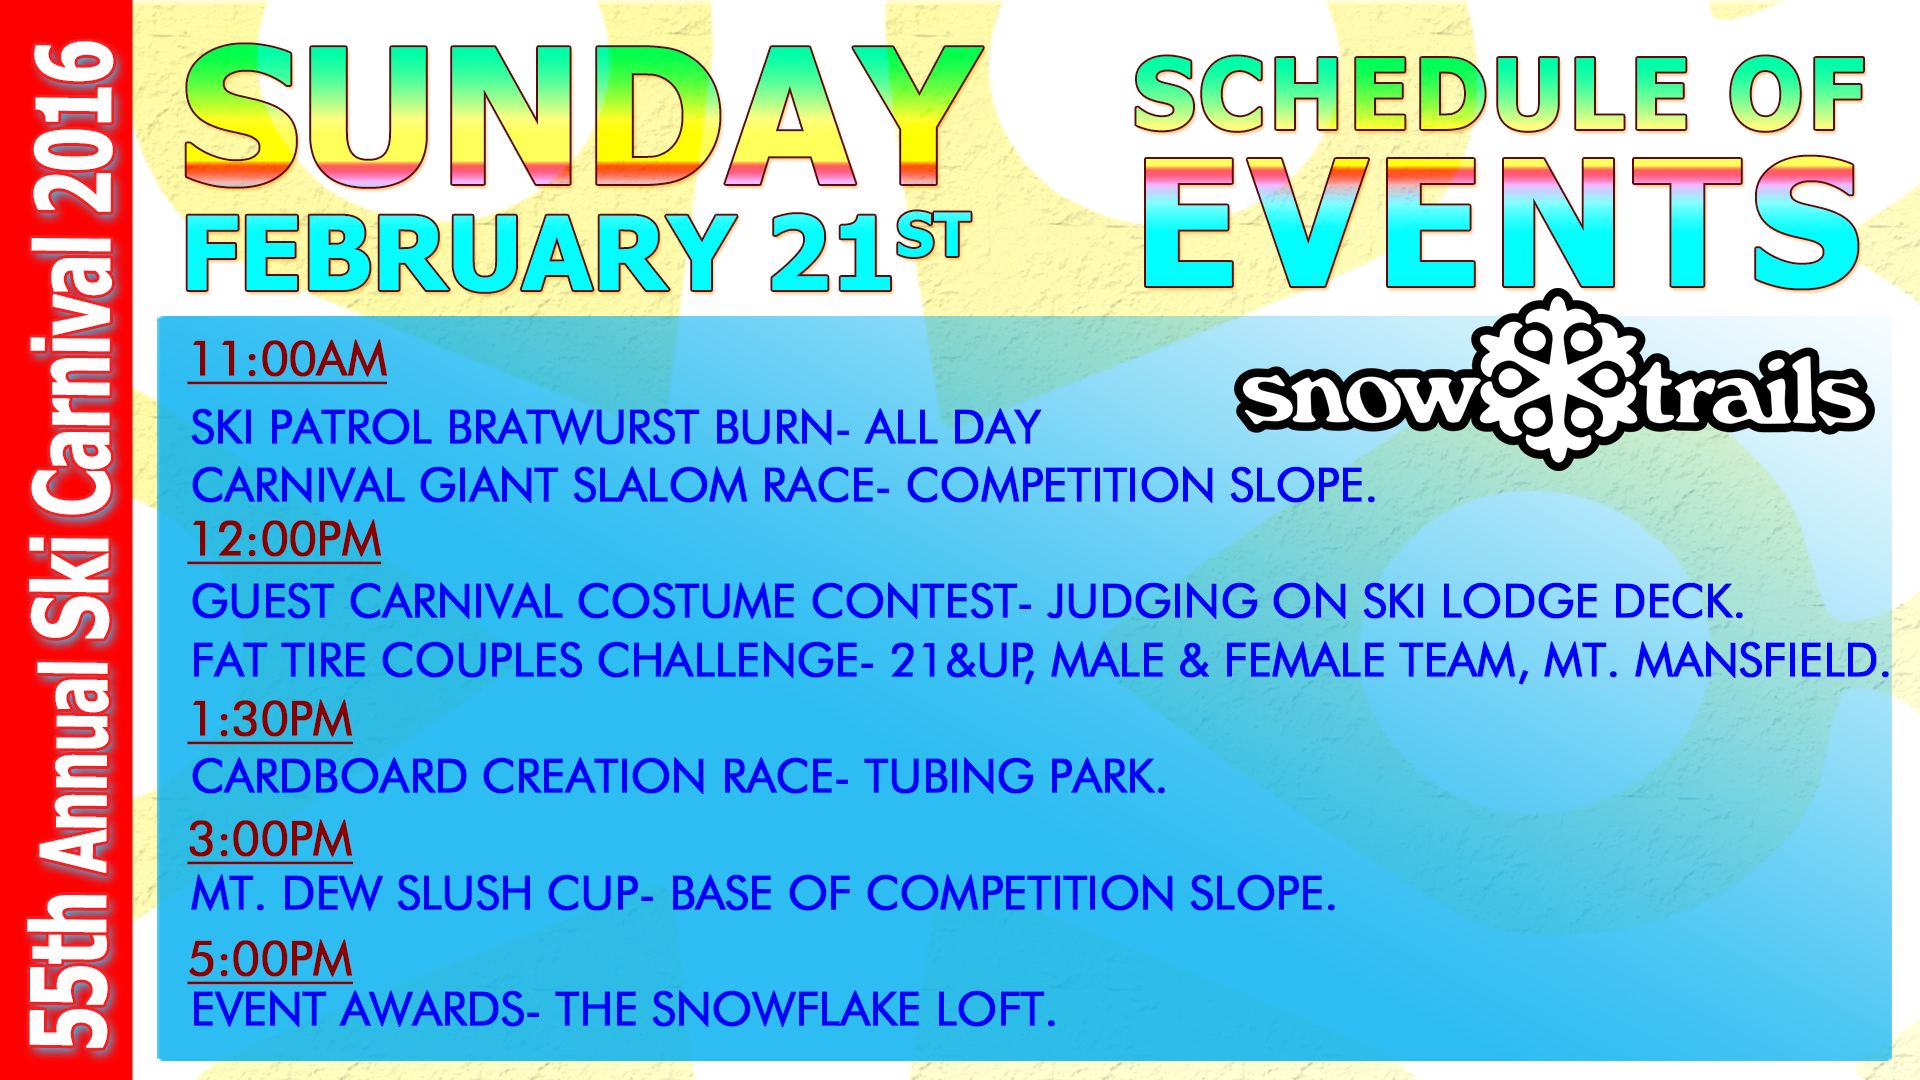 55th Carnival Sunday, February 21st Schedule of Events